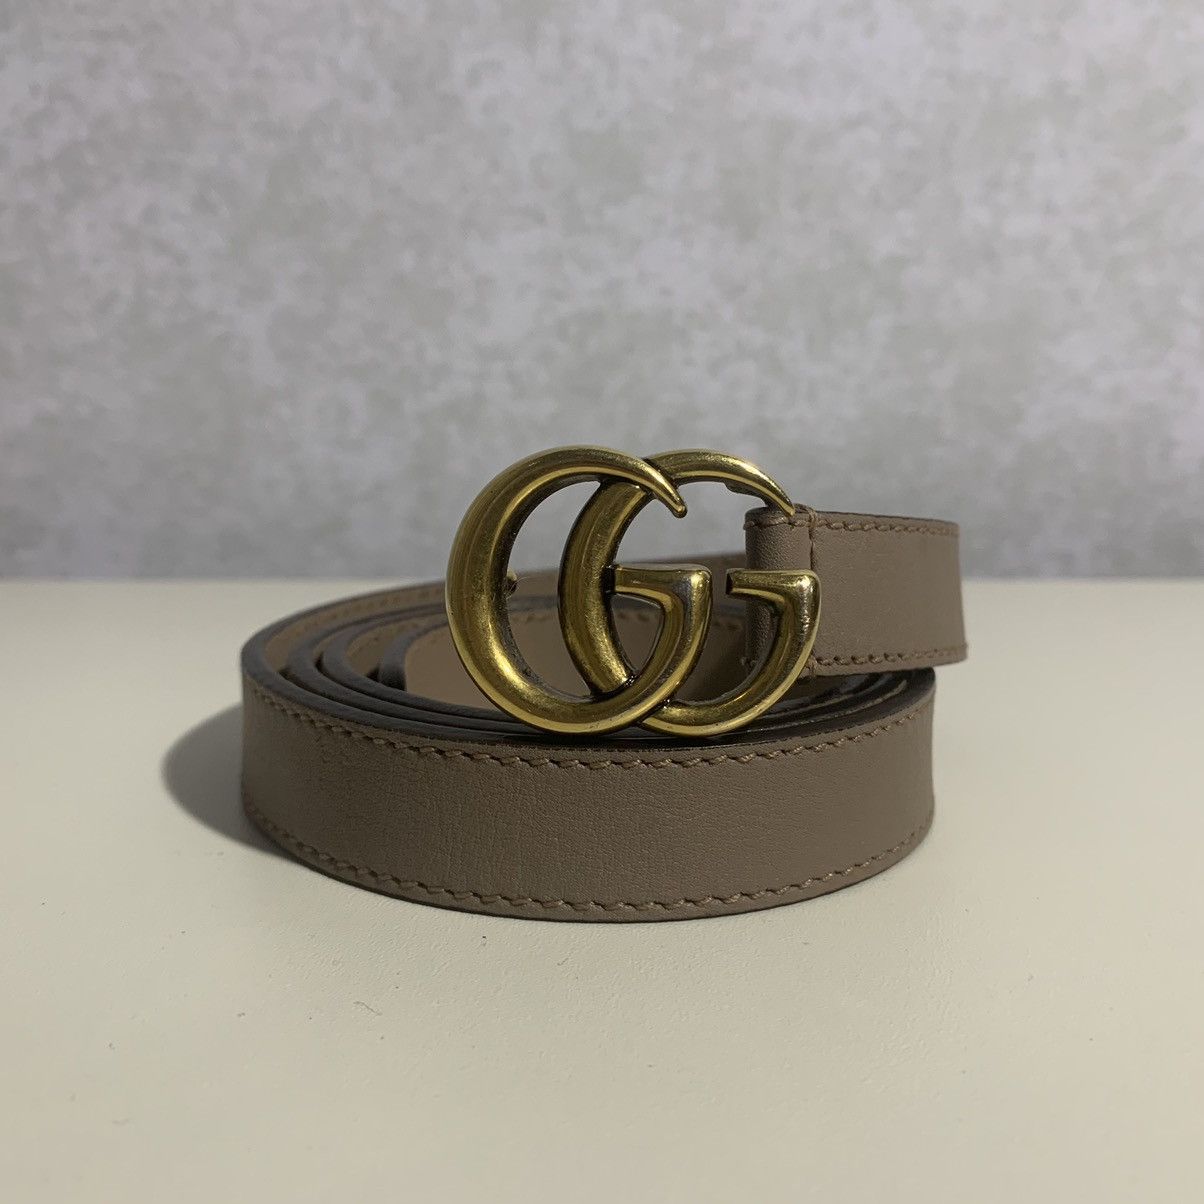 Gucci Leather GG Belt 409417 AP00T | Grailed